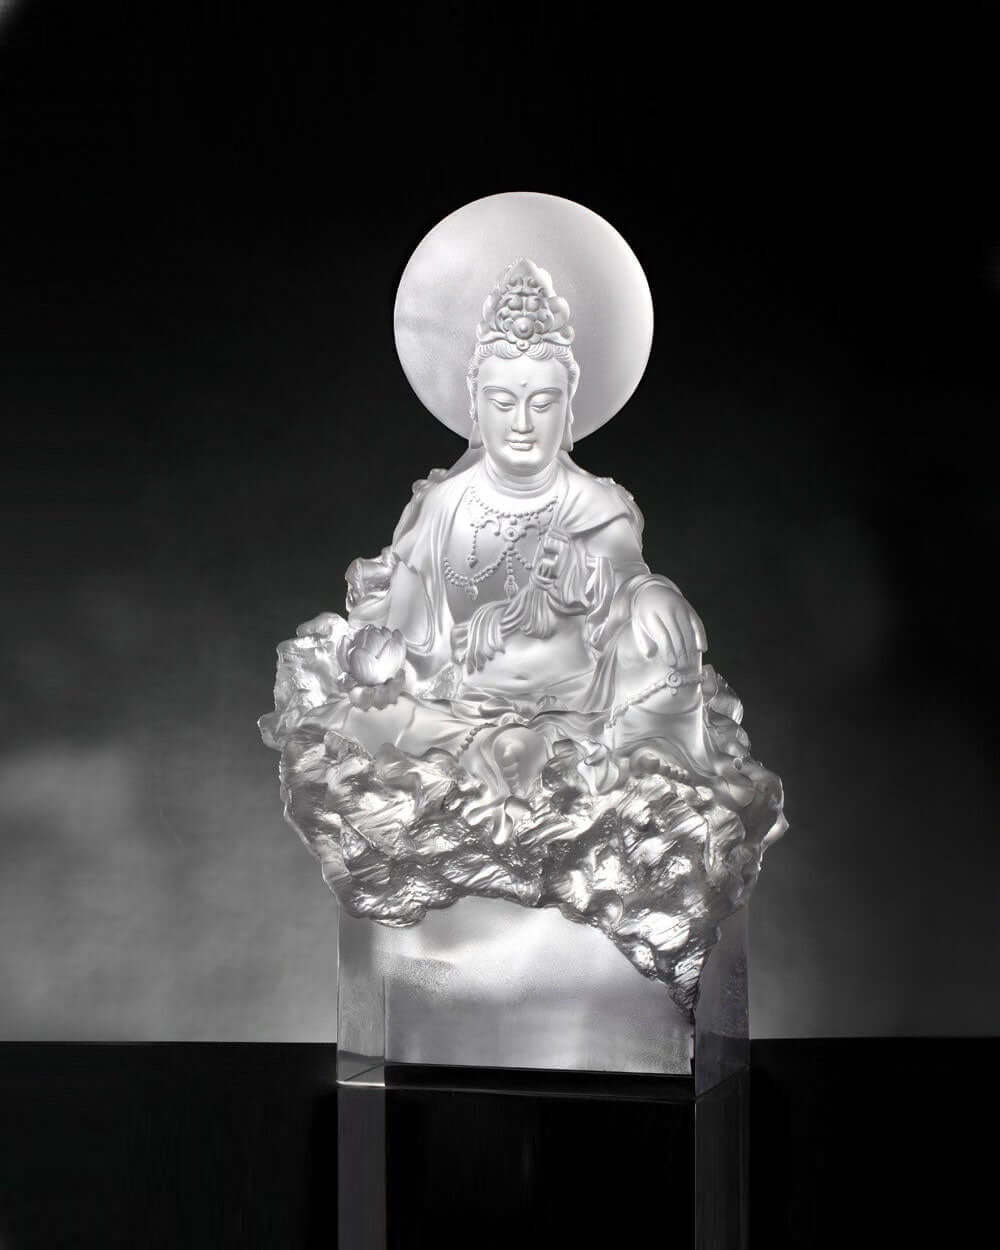 LIULI Crystal Art Crystal Buddha, Guanyin, Light Exists Because of Love-Tranquil, at Peace